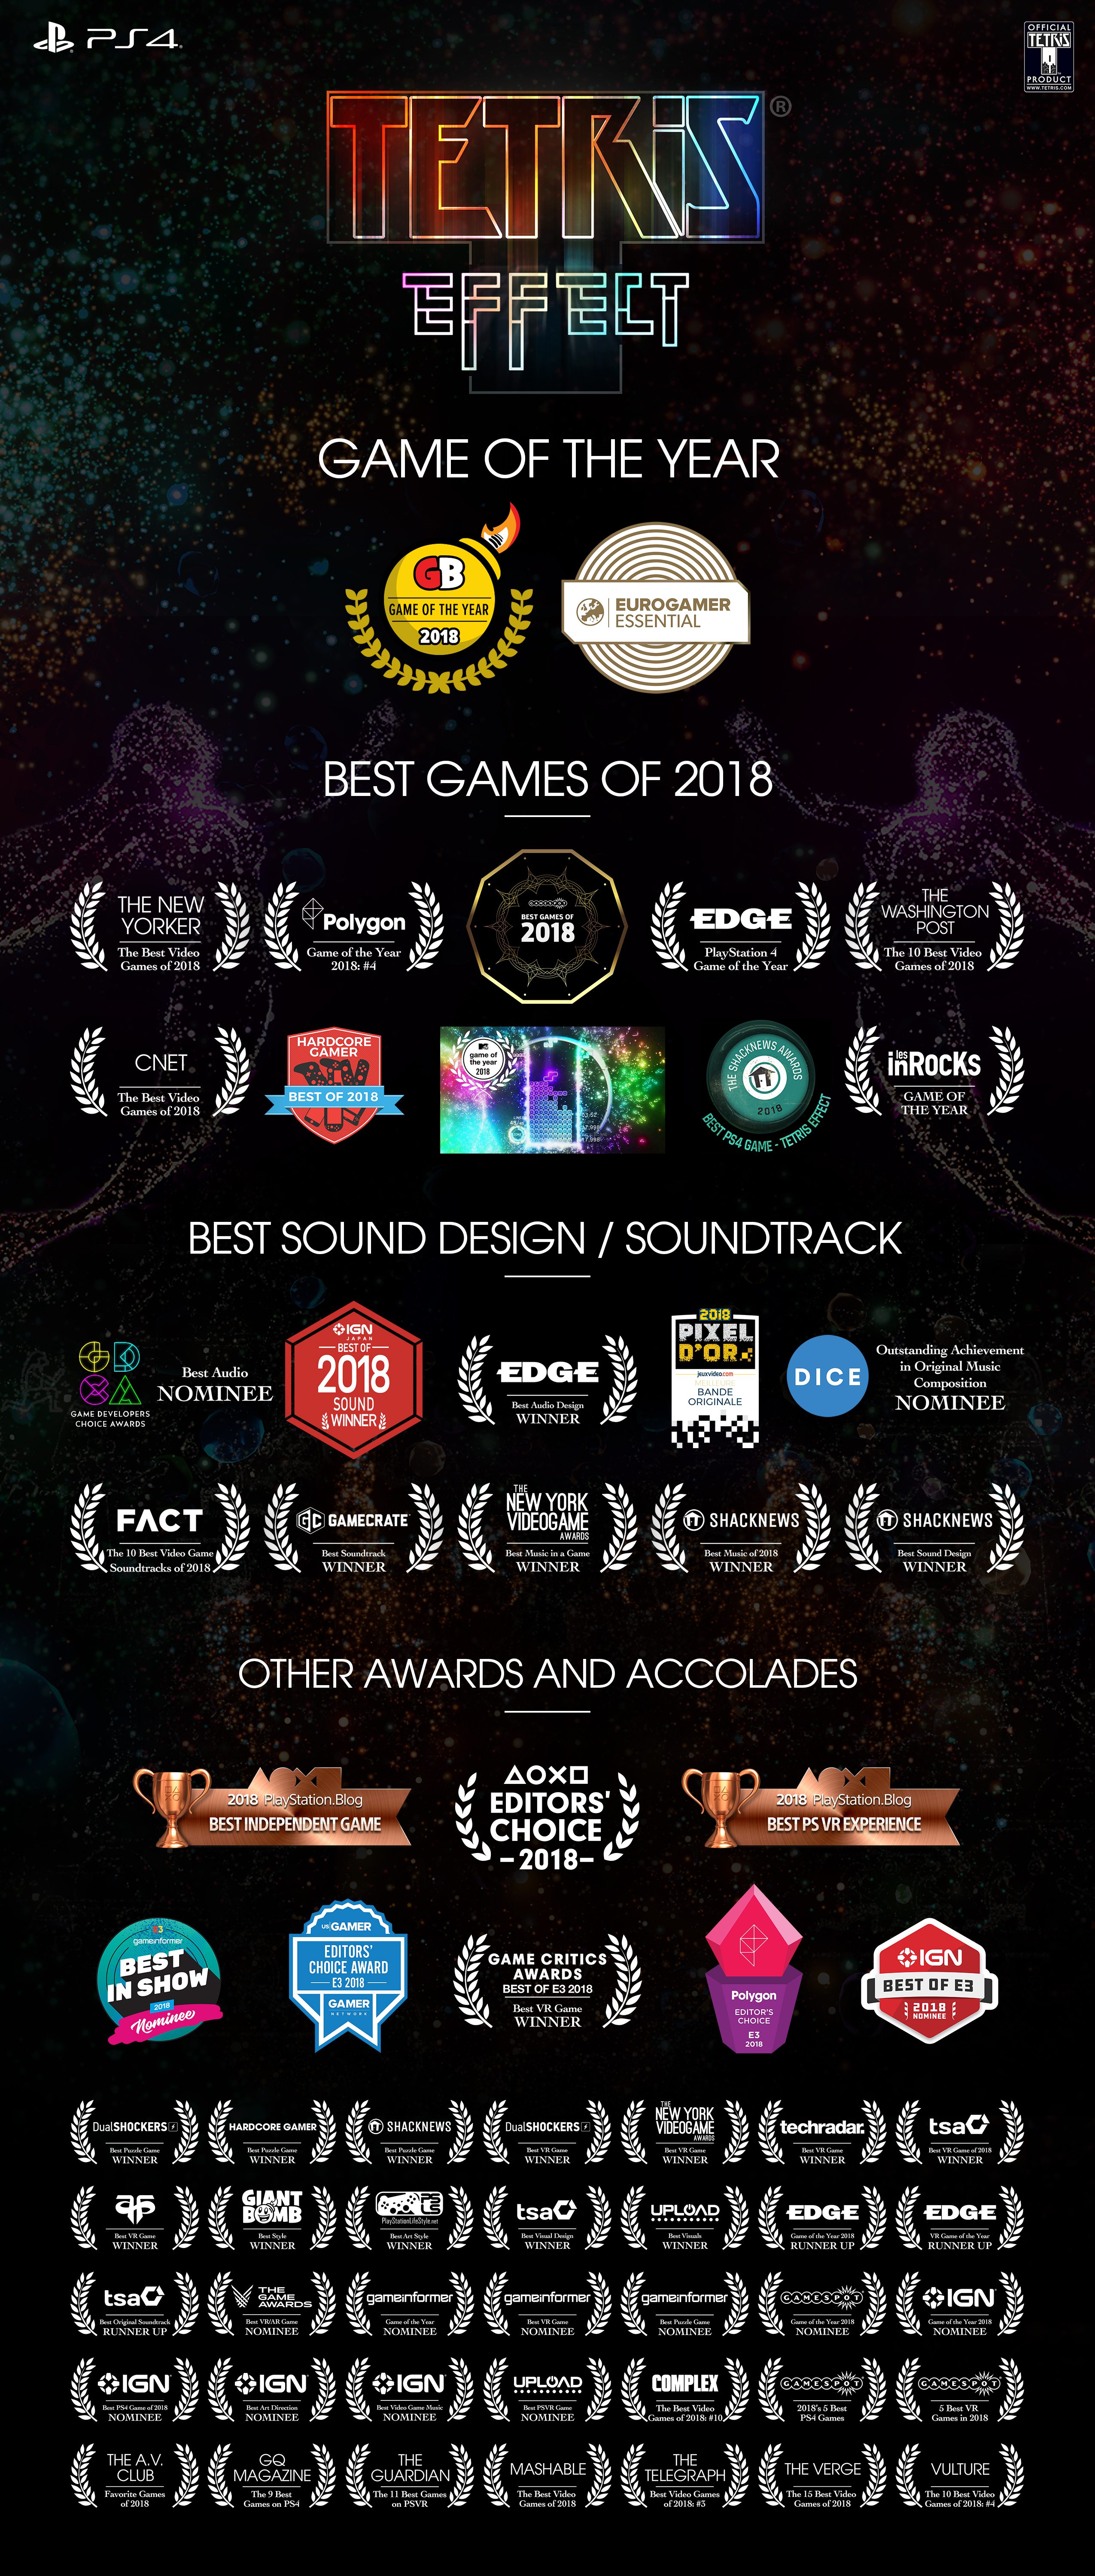 game of the year – PlayStation.Blog